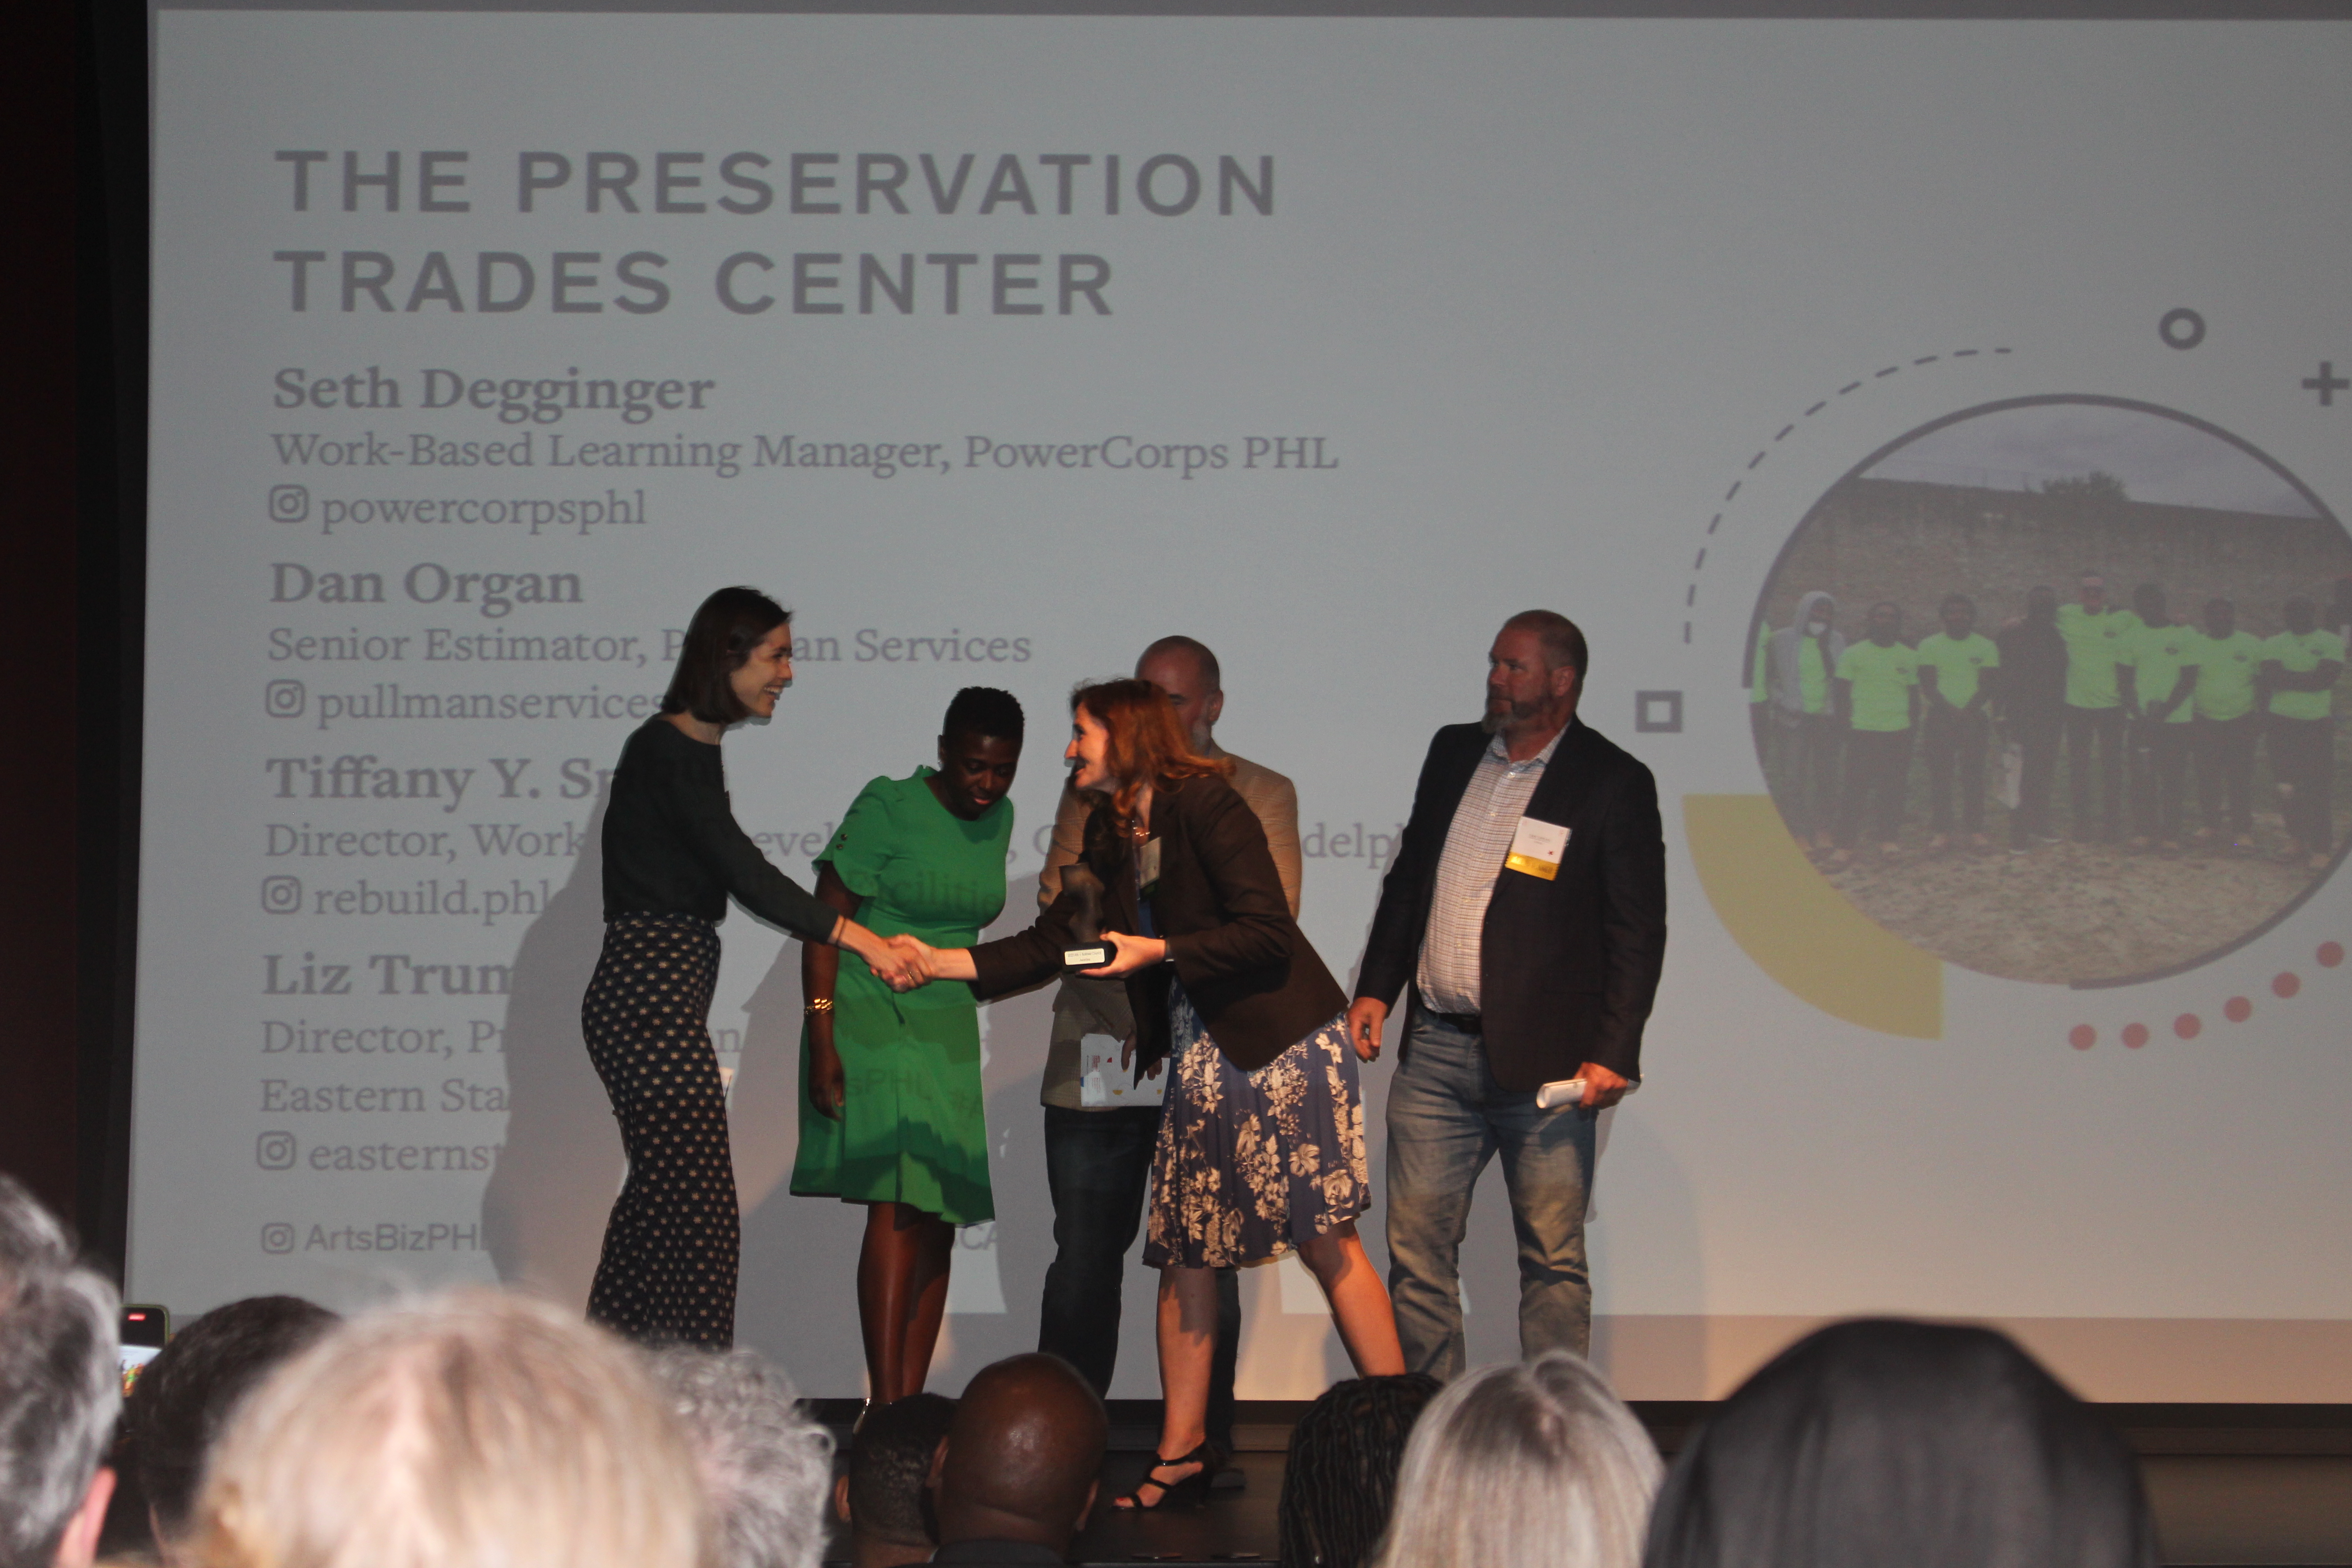 The Preservation Trades Center received the third and final honor. Photo: Jensen Toussaint/AL DÍA News.